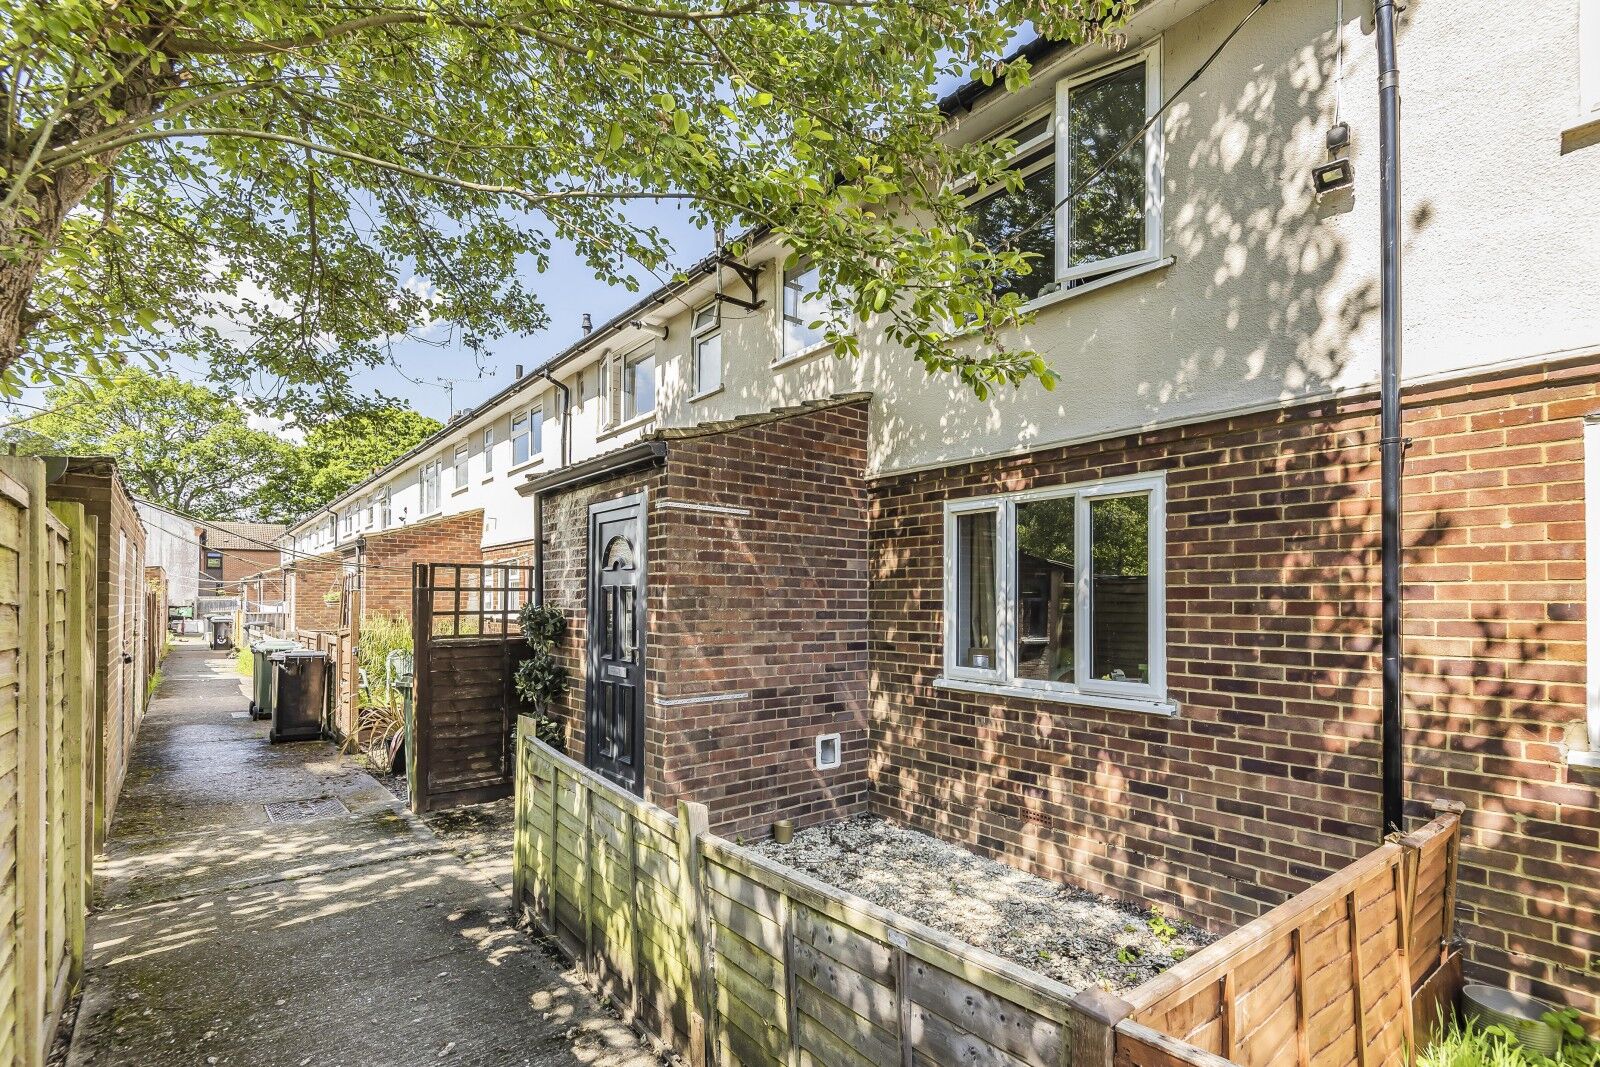 2 bedroom  maisonette for sale Three Firs Way, Burghfield Common, RG7, main image